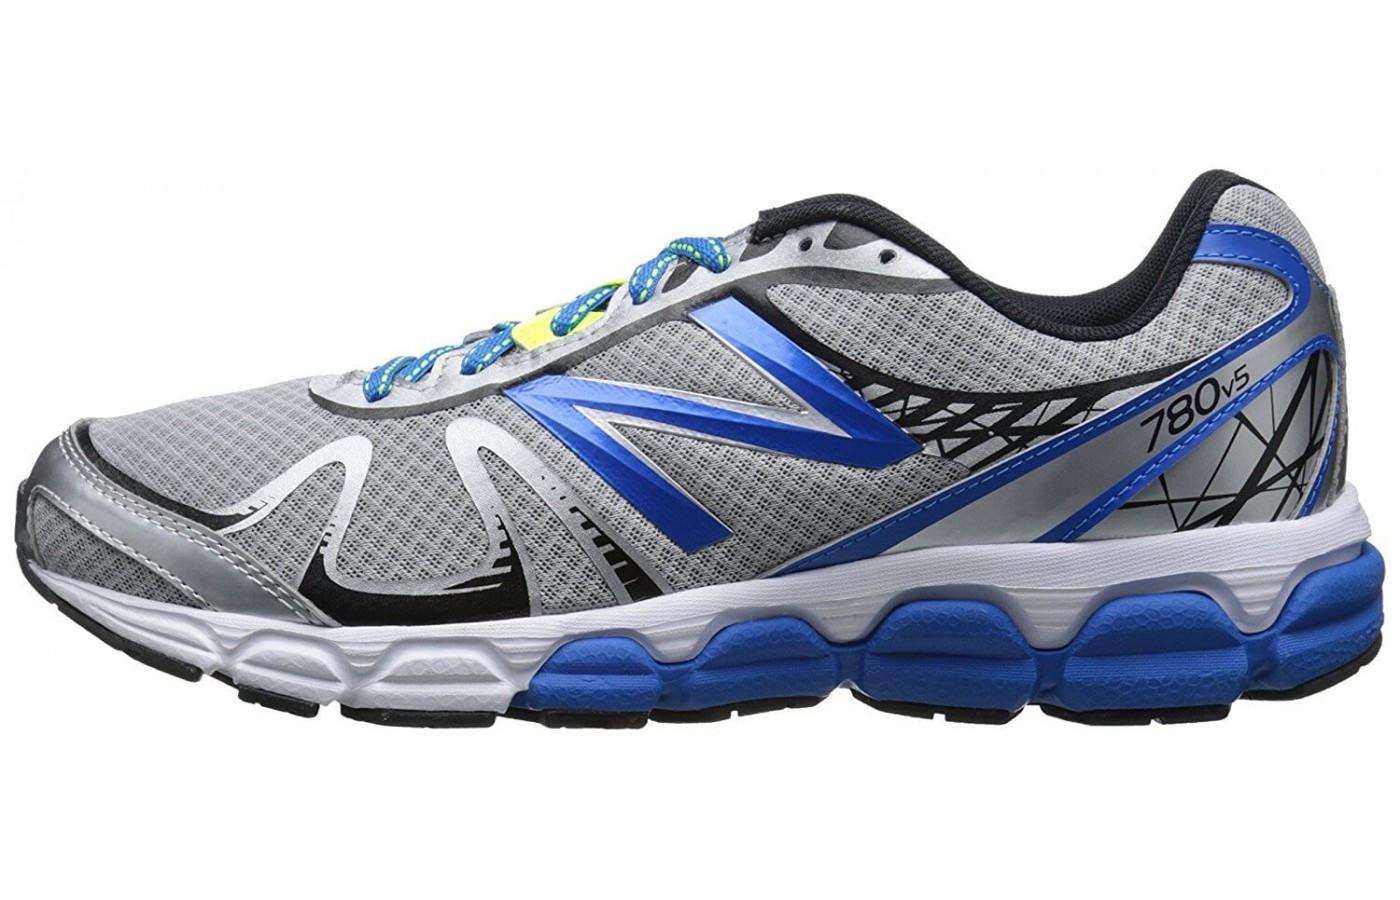 the New Balance 780 v5 is lightweight with good cushioning